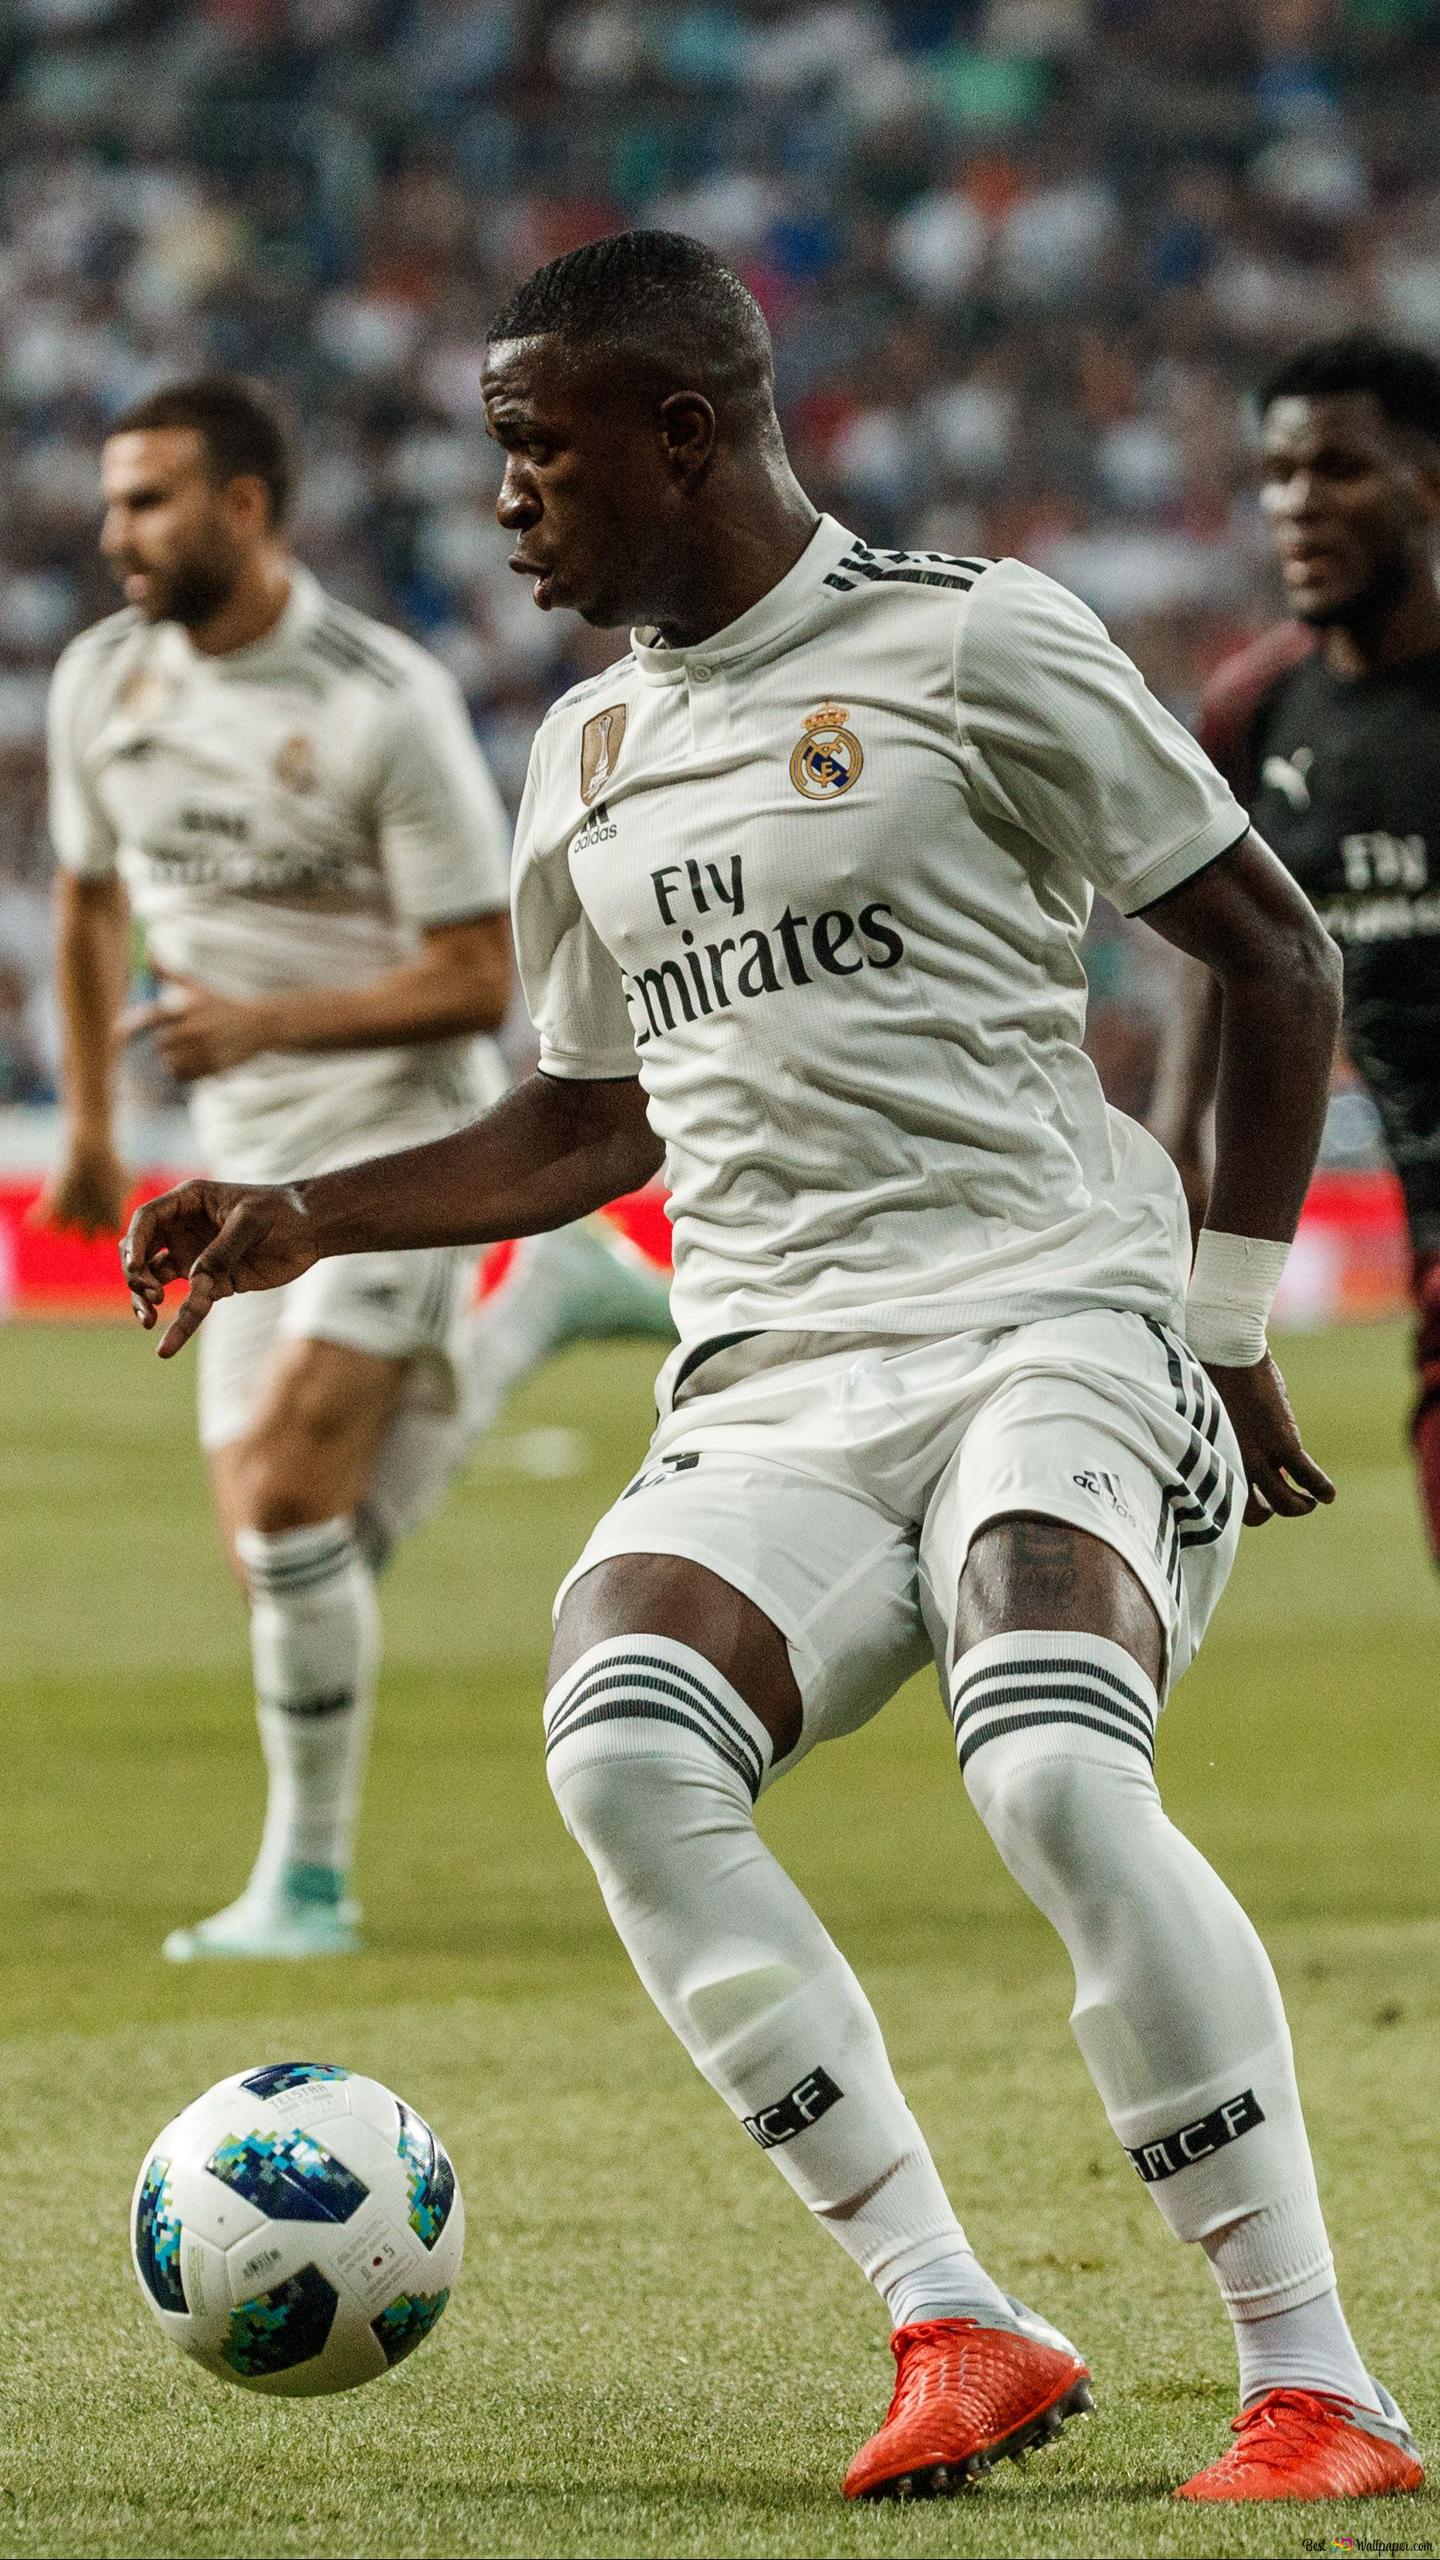 Vinicius Junior, the young forward of Real Madrid HD wallpaper download